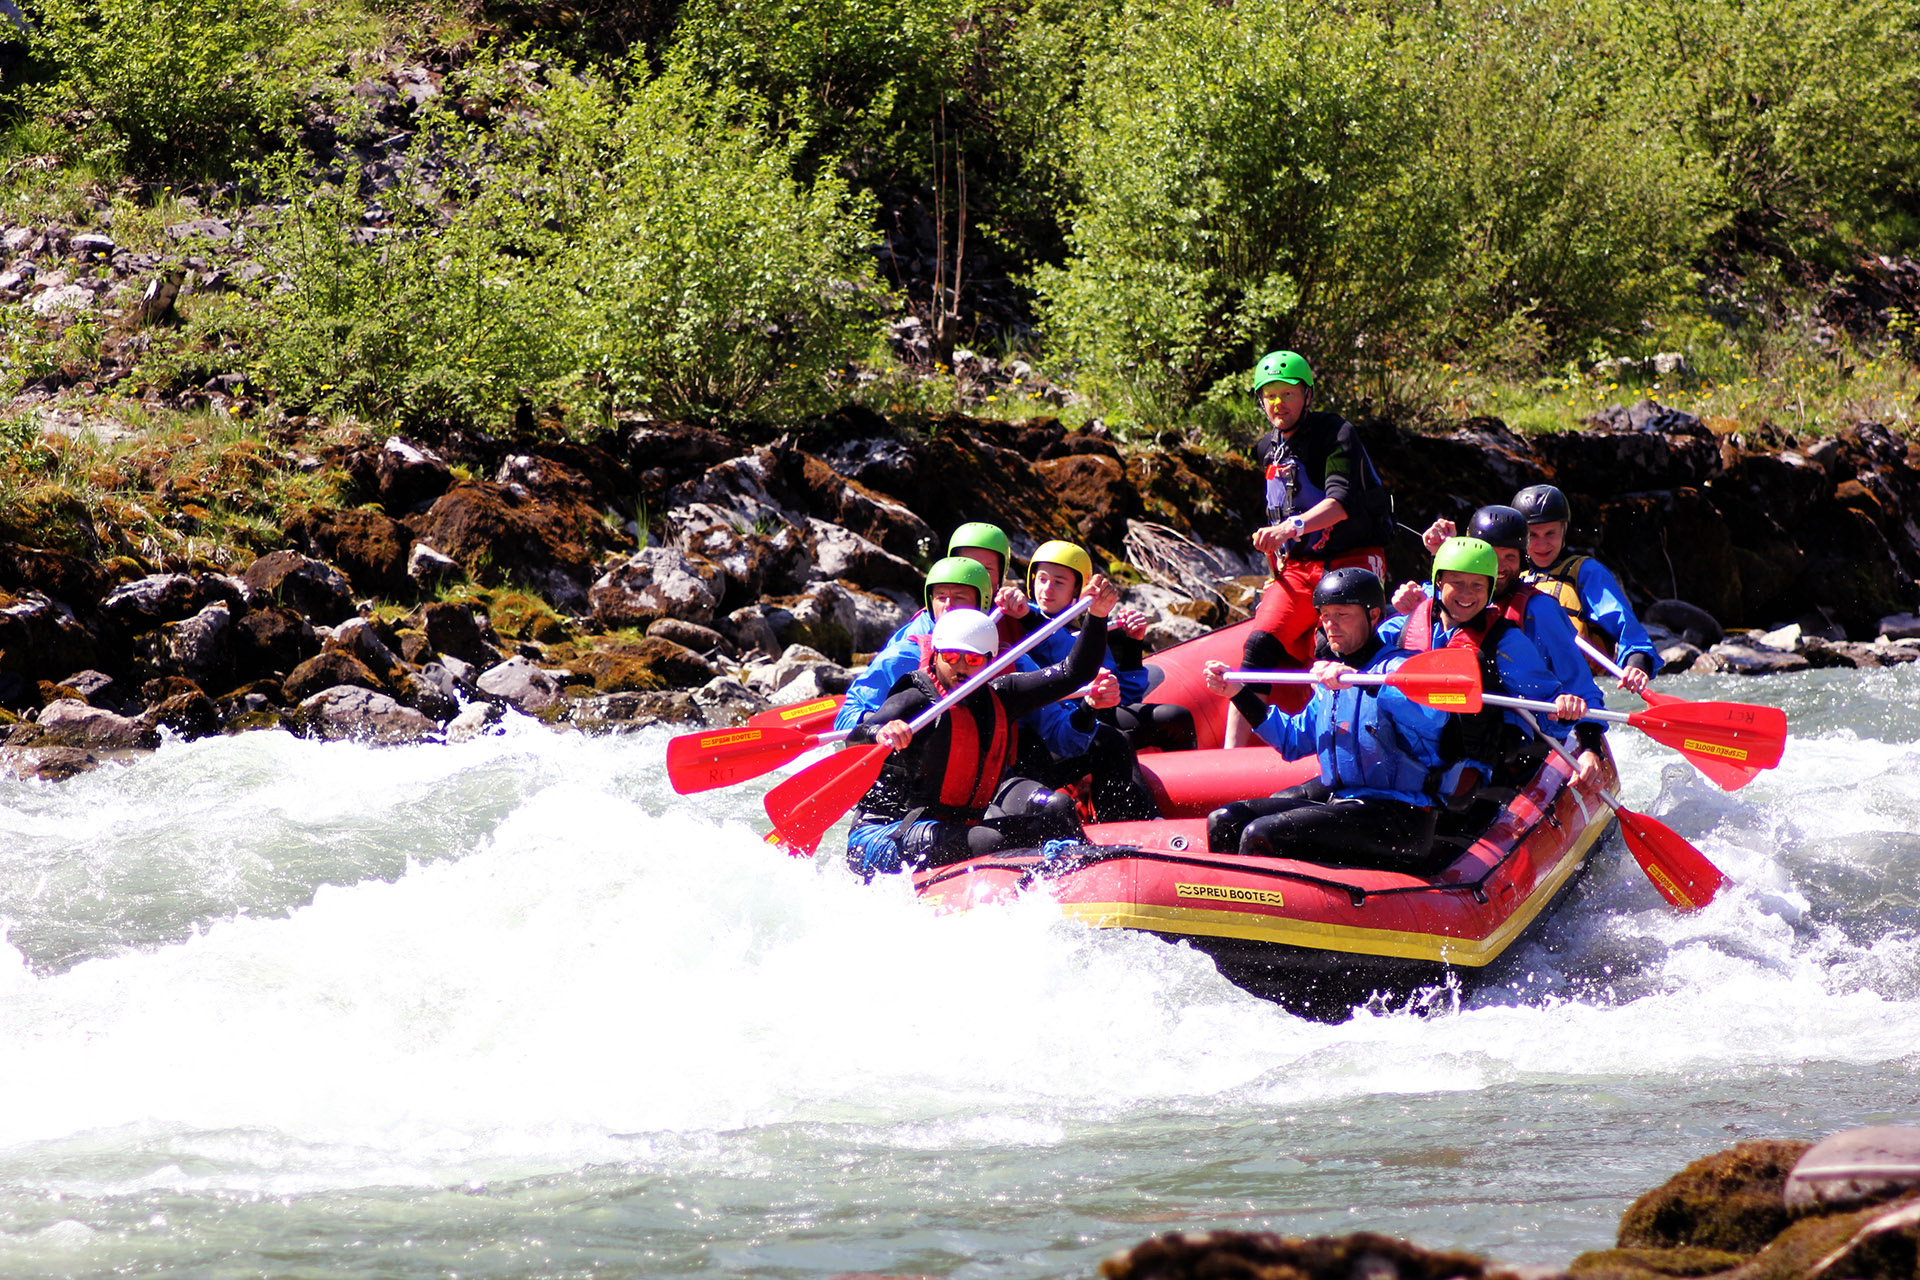 Rafting: Recreational whitewater boating of a 2-3 class of difficulty. 1920x1280 HD Wallpaper.